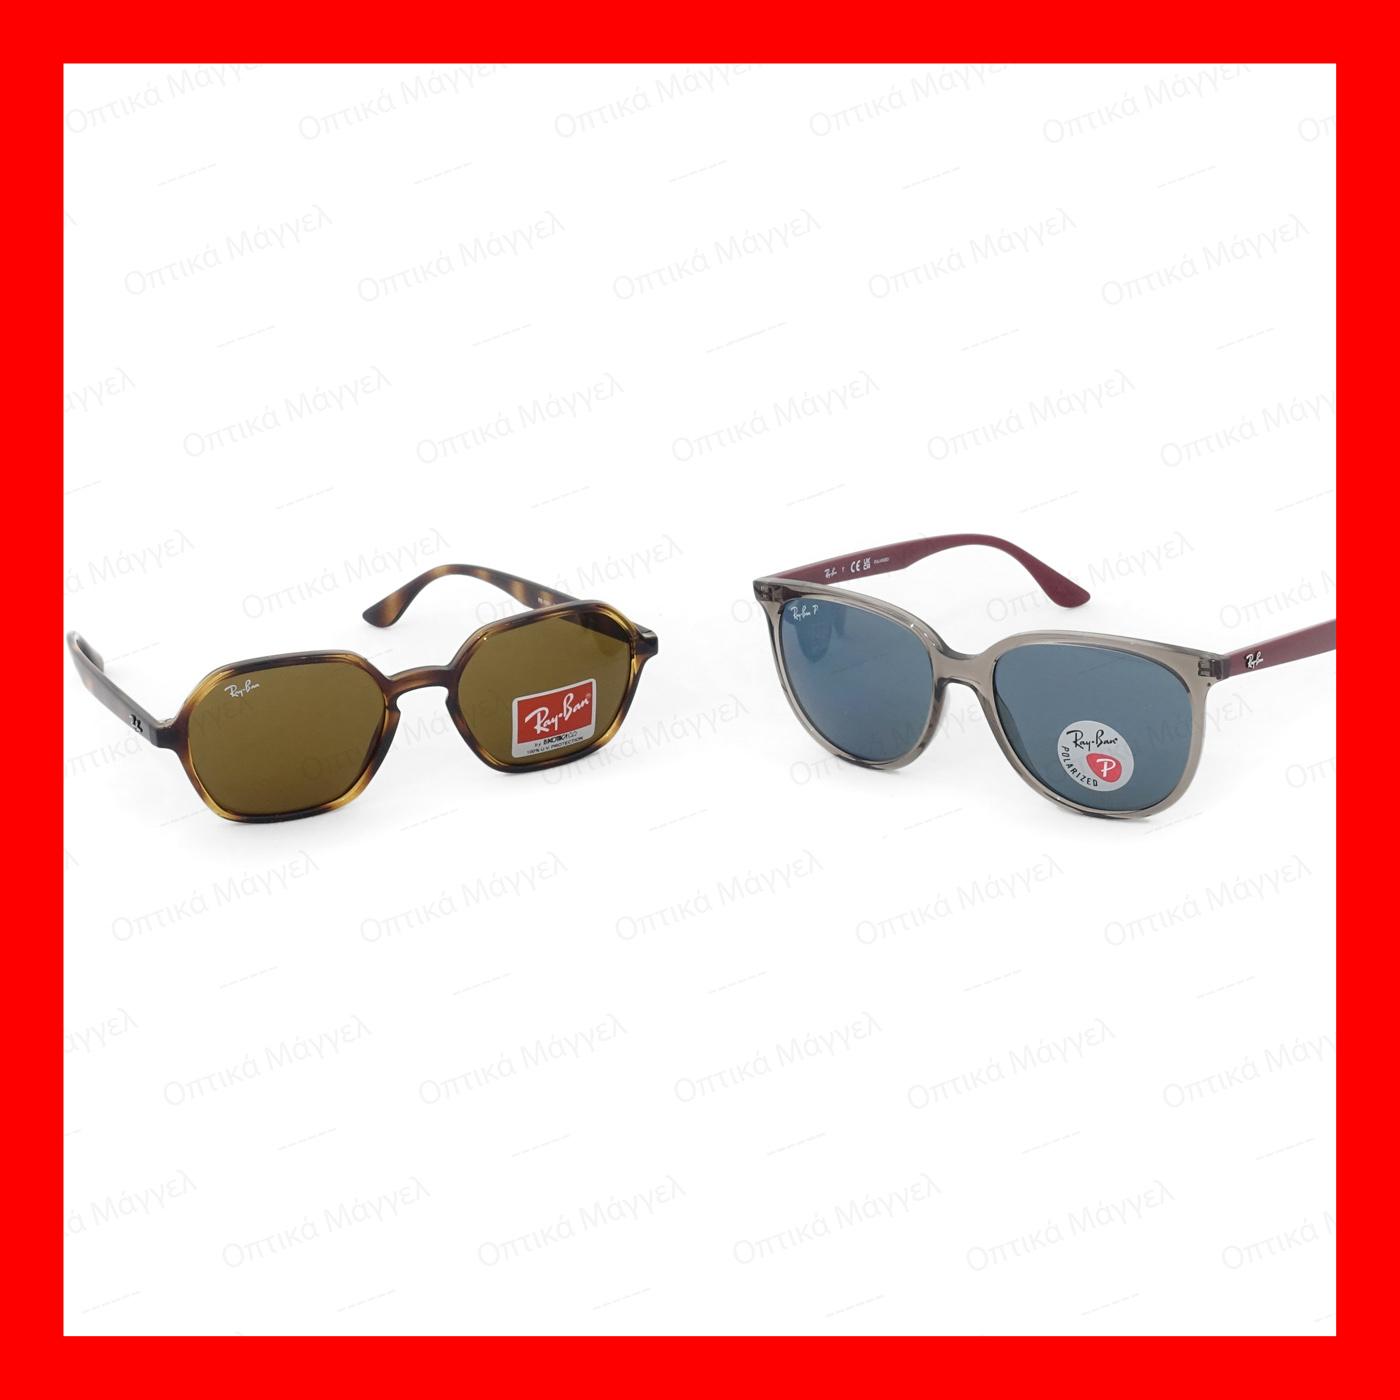 Summer 2022 additions in our Ray-Ban sunglasses collection!